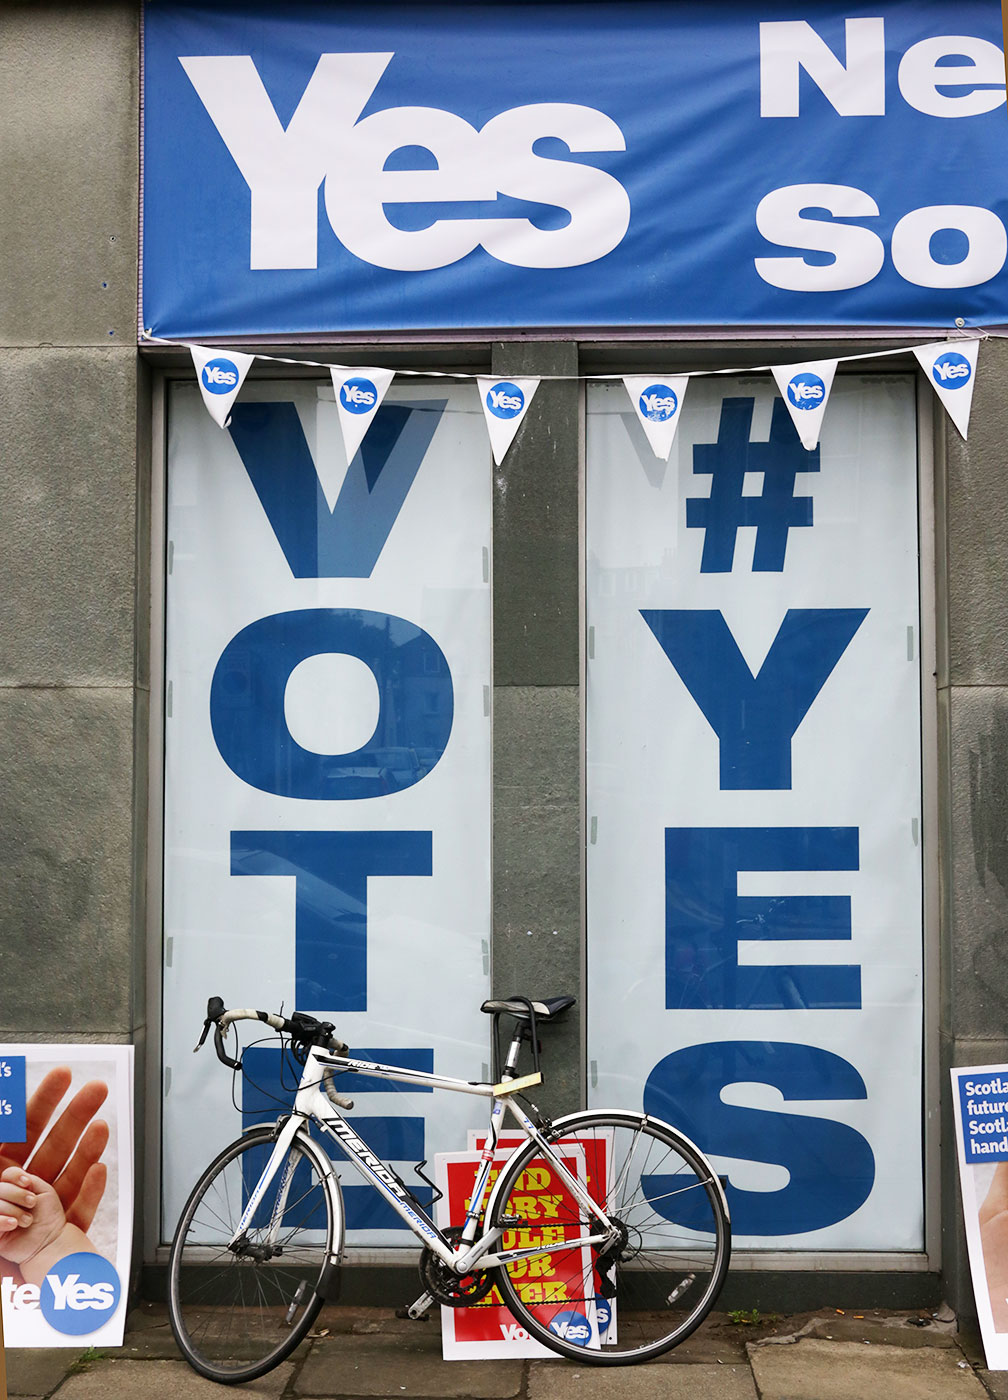 Photos taken in Edinburgh on voting day in the  Scottish Indepemdence Referendum on 18 September 2014  -  'Yes' Campaign Poster at Southside